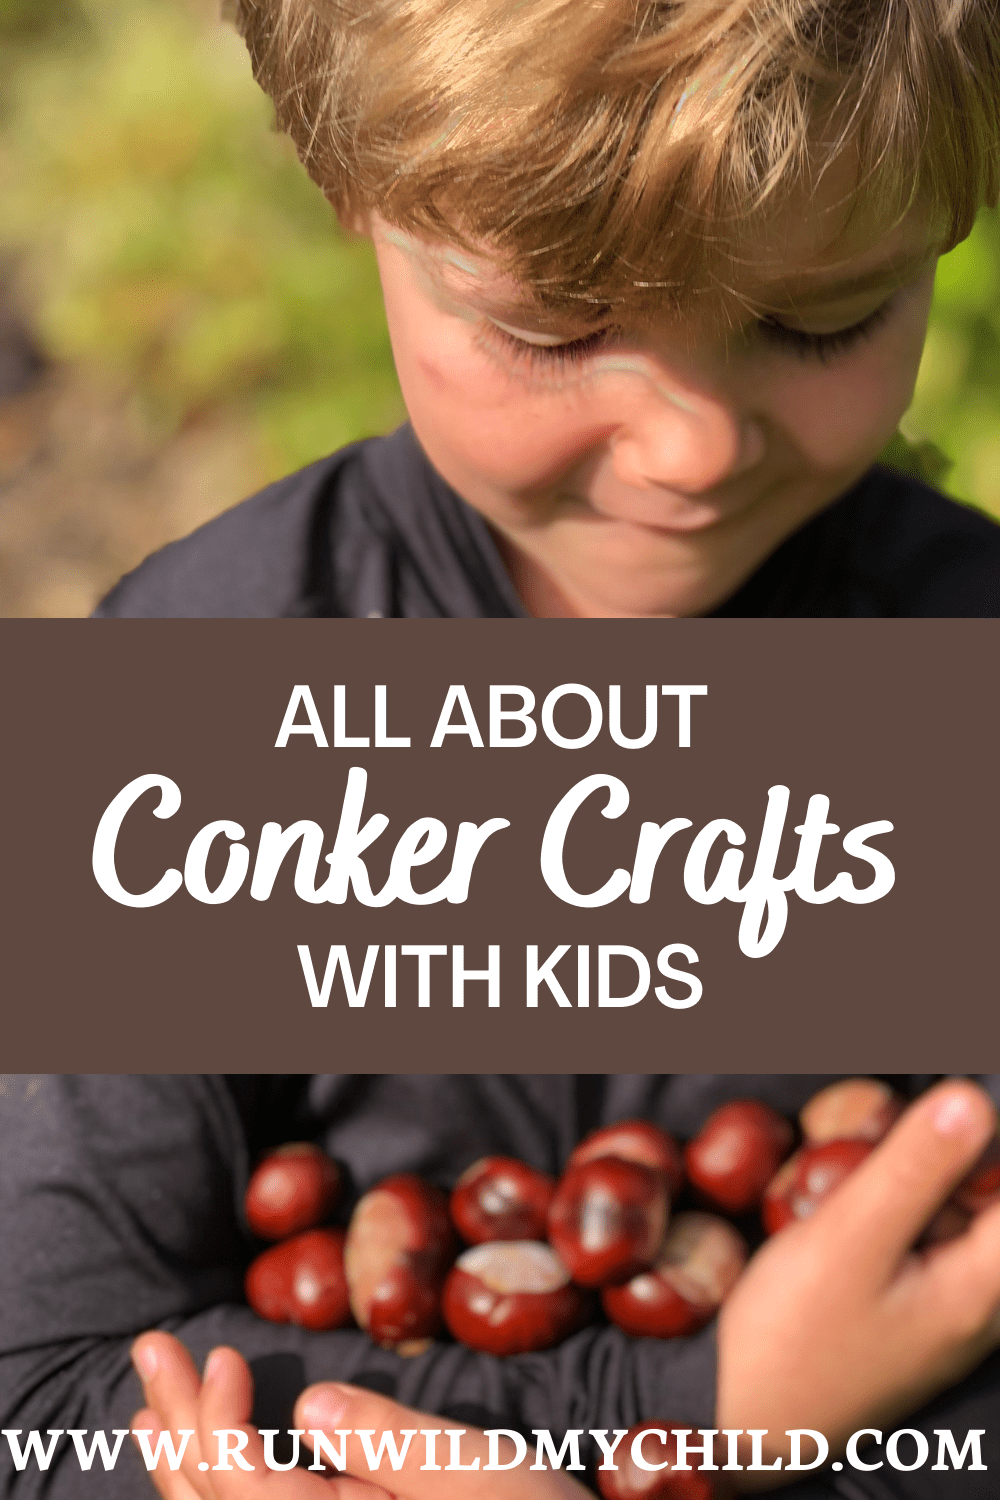 All about Conker Crafts with Kids